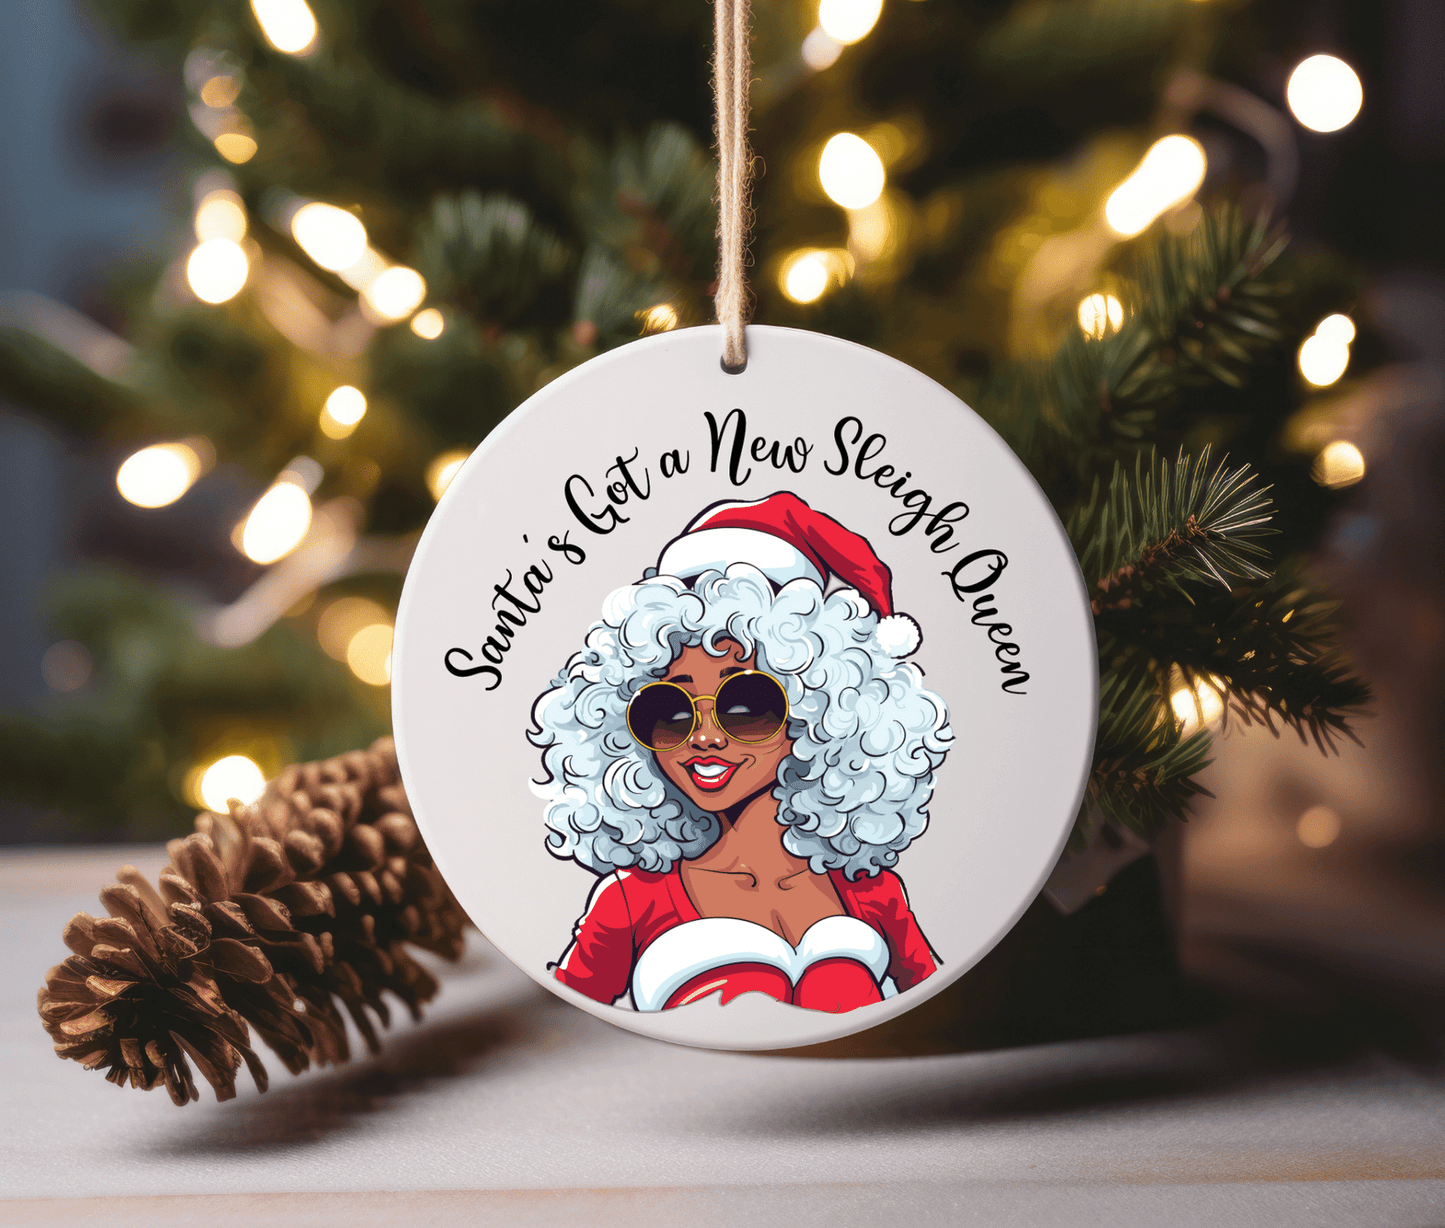 Santa's sleigh queen, personalized christmas ornaments, personalized tree ornaments, xmas tree ornaments, first christmas ornament, memorial ornaments, our first christmas ornament, black ornaments, christmas keepsake ornament, 2023 ornament, 2023 holiday gift, letter ornament, black santa, black woman christmas, melanin christmas, black girl christmas, black woman christmas gift, african christmas gifts